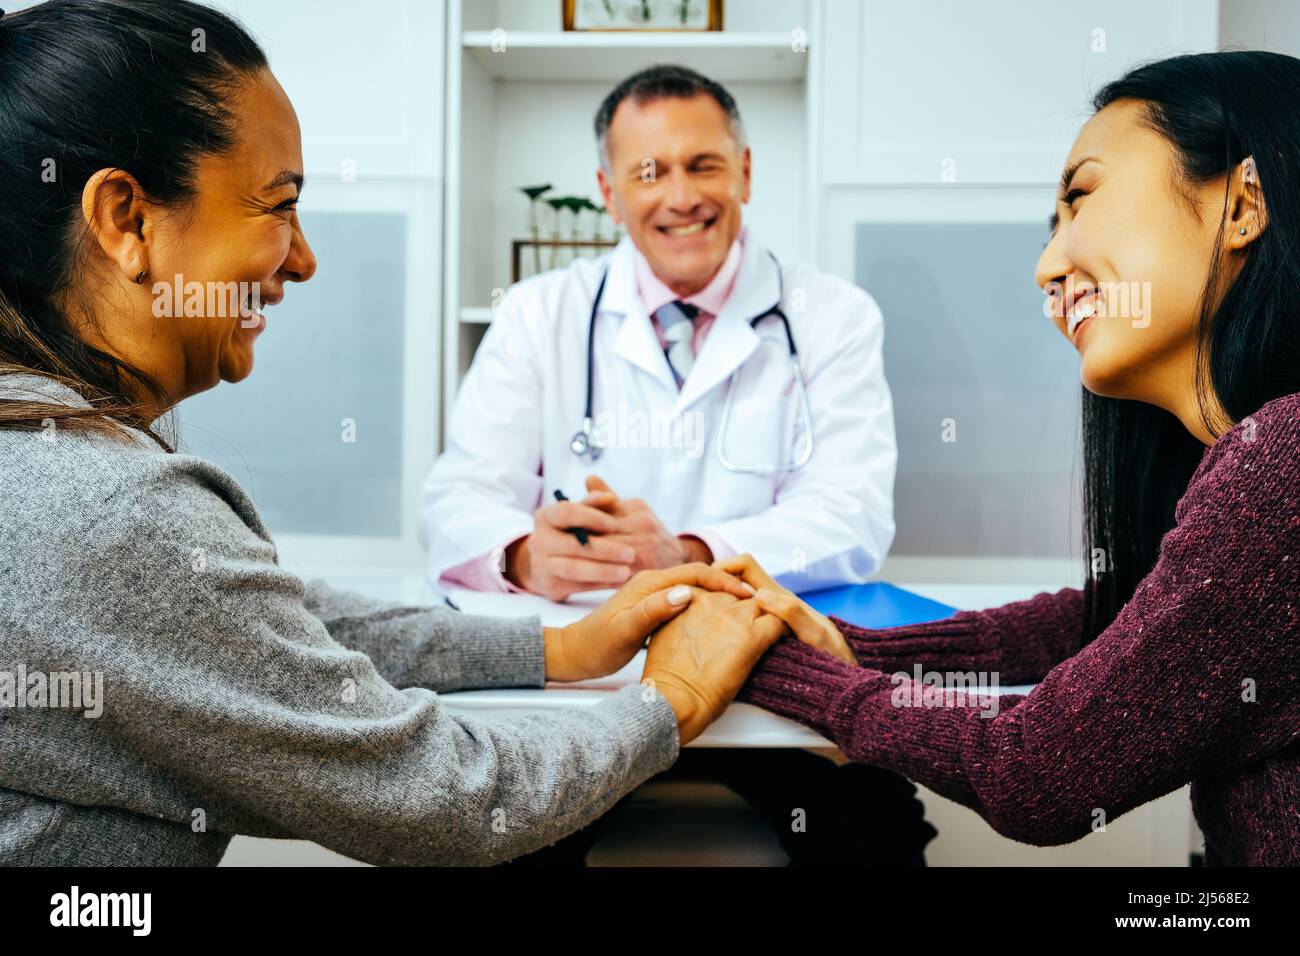 smiling doctor and happy adult female patients in doctor's office healthcare industry Stock Photo